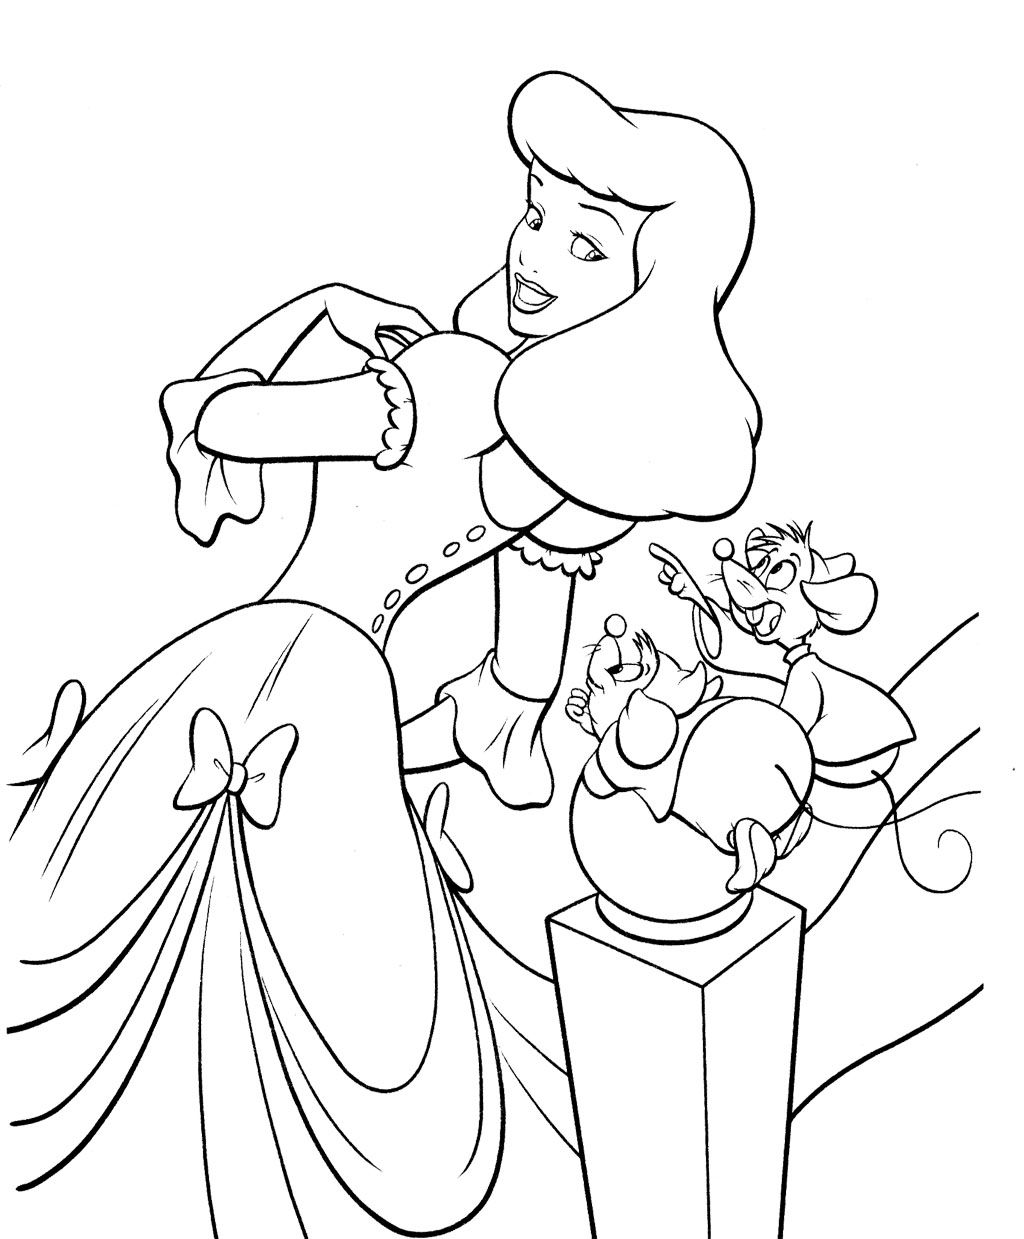 cinderella mice coloring pages 58 best hobby colouring pages mickey minnie mouse images cinderella mice coloring pages 